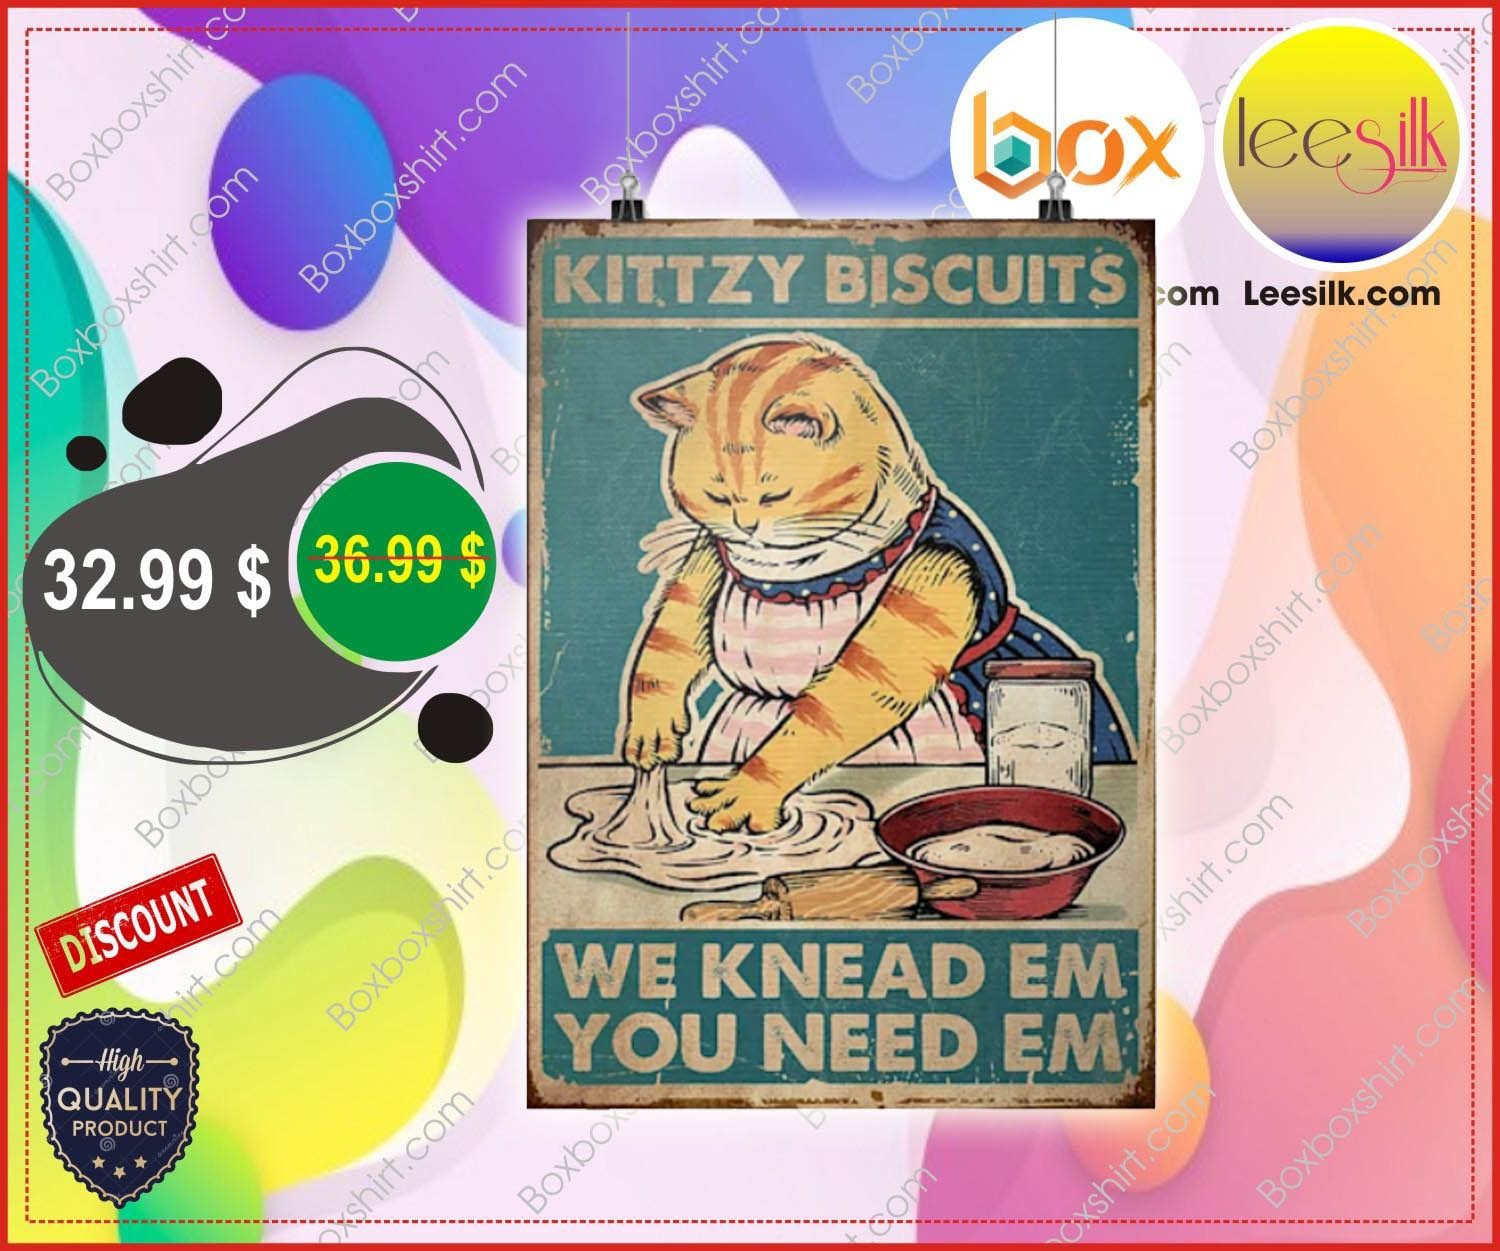 Kittzy biscuits we knead em you need em poster 4